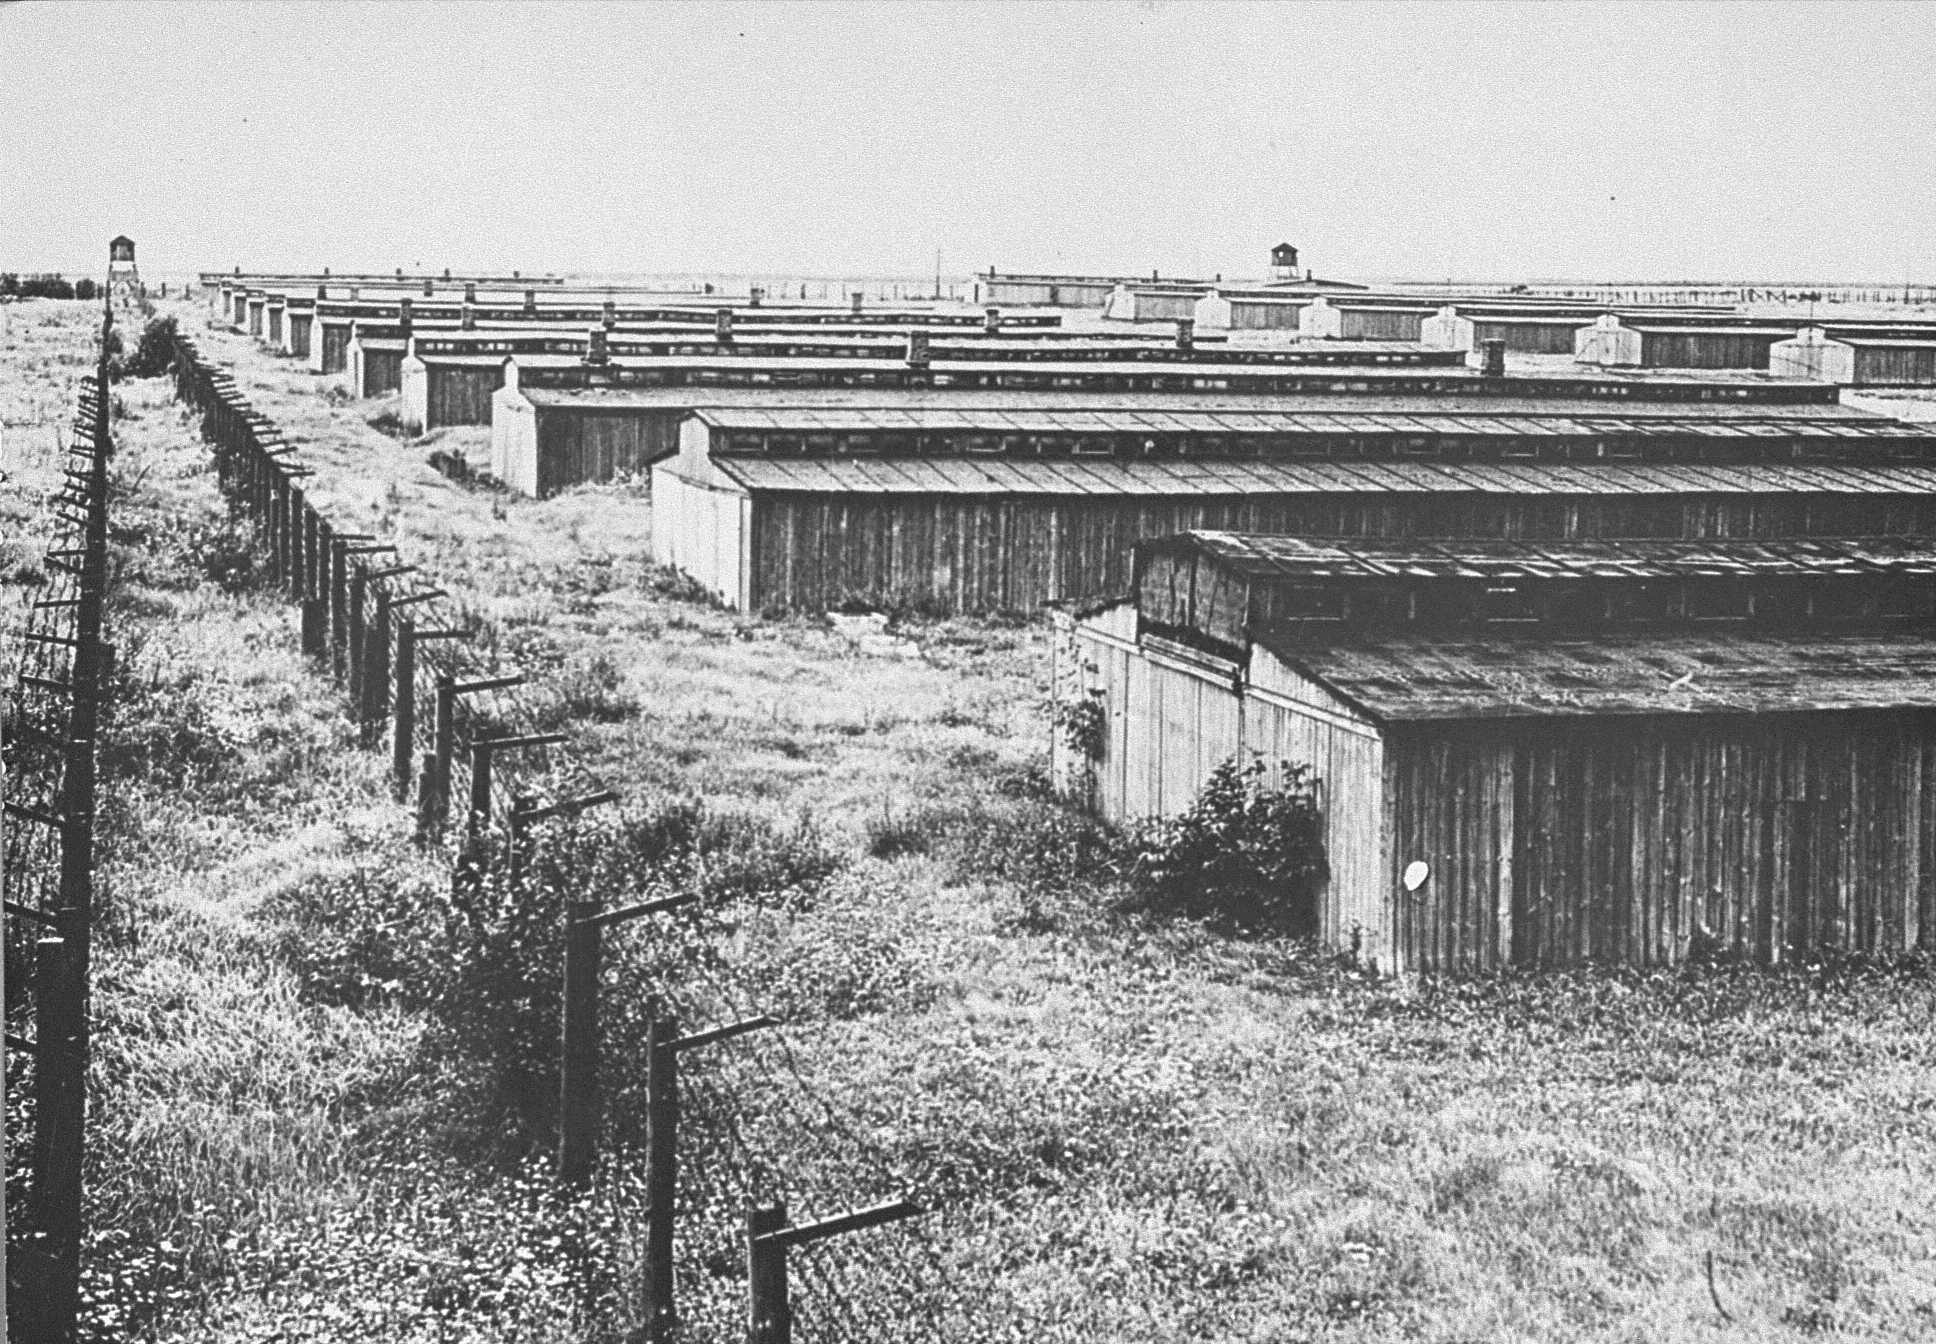 A section of the prisoners' barracks in Majdanek, a major extermination camp near the city of Lublin in Nazi-occupied Poland, taken sometime after July 24, 1944. Photo credit: USHMM #73996